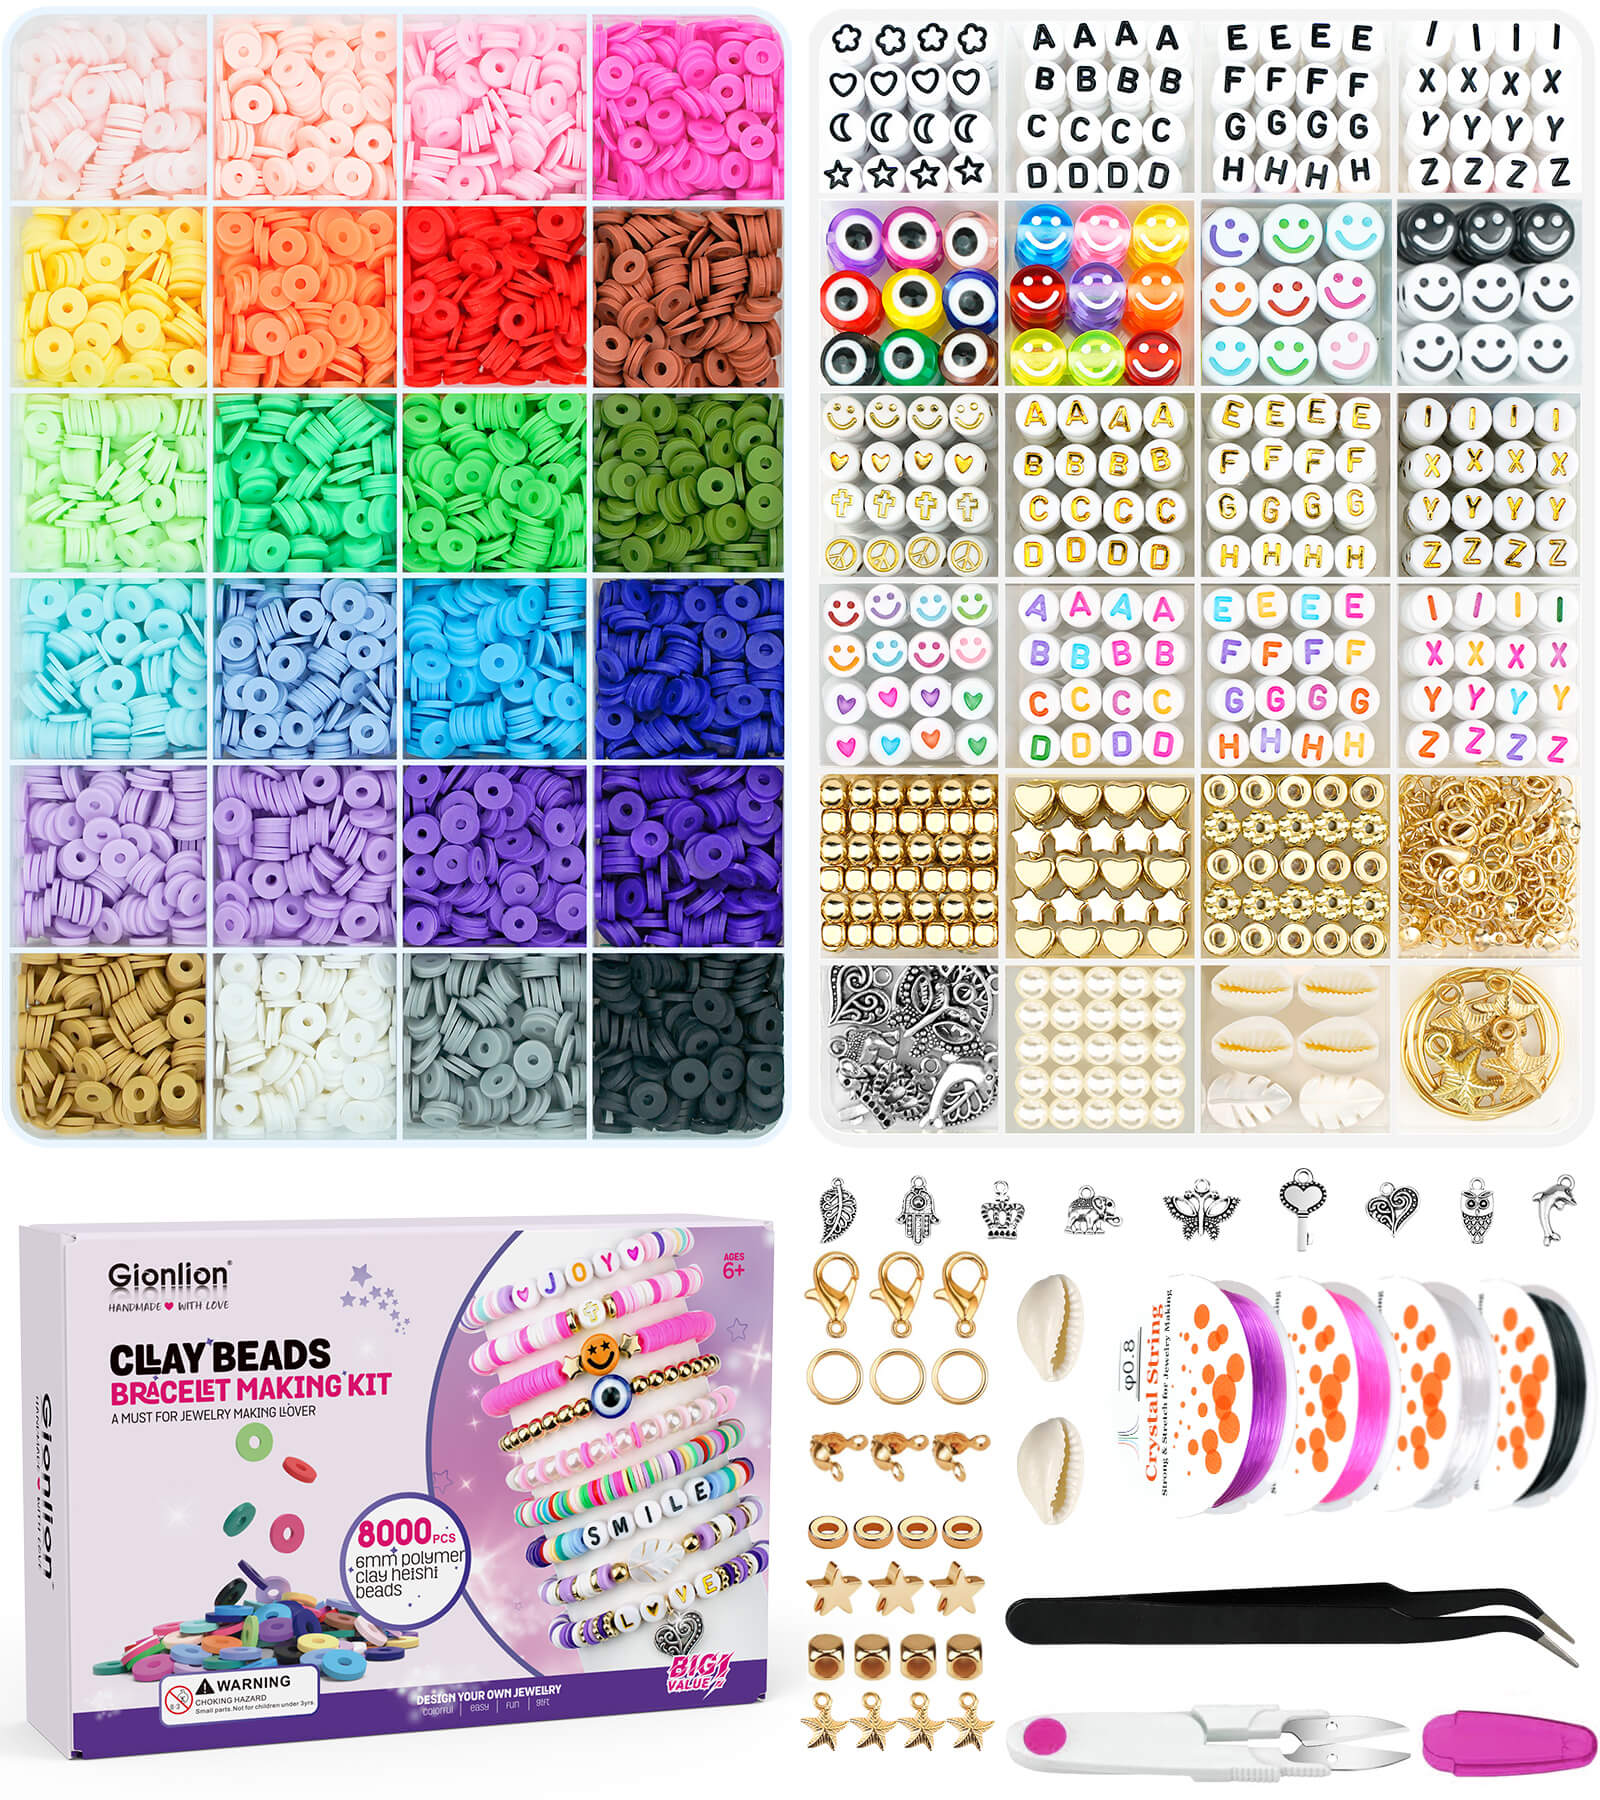 Gionlion Clay Beads Bracelet Making Kit, 8000PCS Preppy Clay Beads Letter Beads Spacer Beads and Charms Kit for Friendship Jewelry Making, Crafts Gift for Girls Ages 8-12